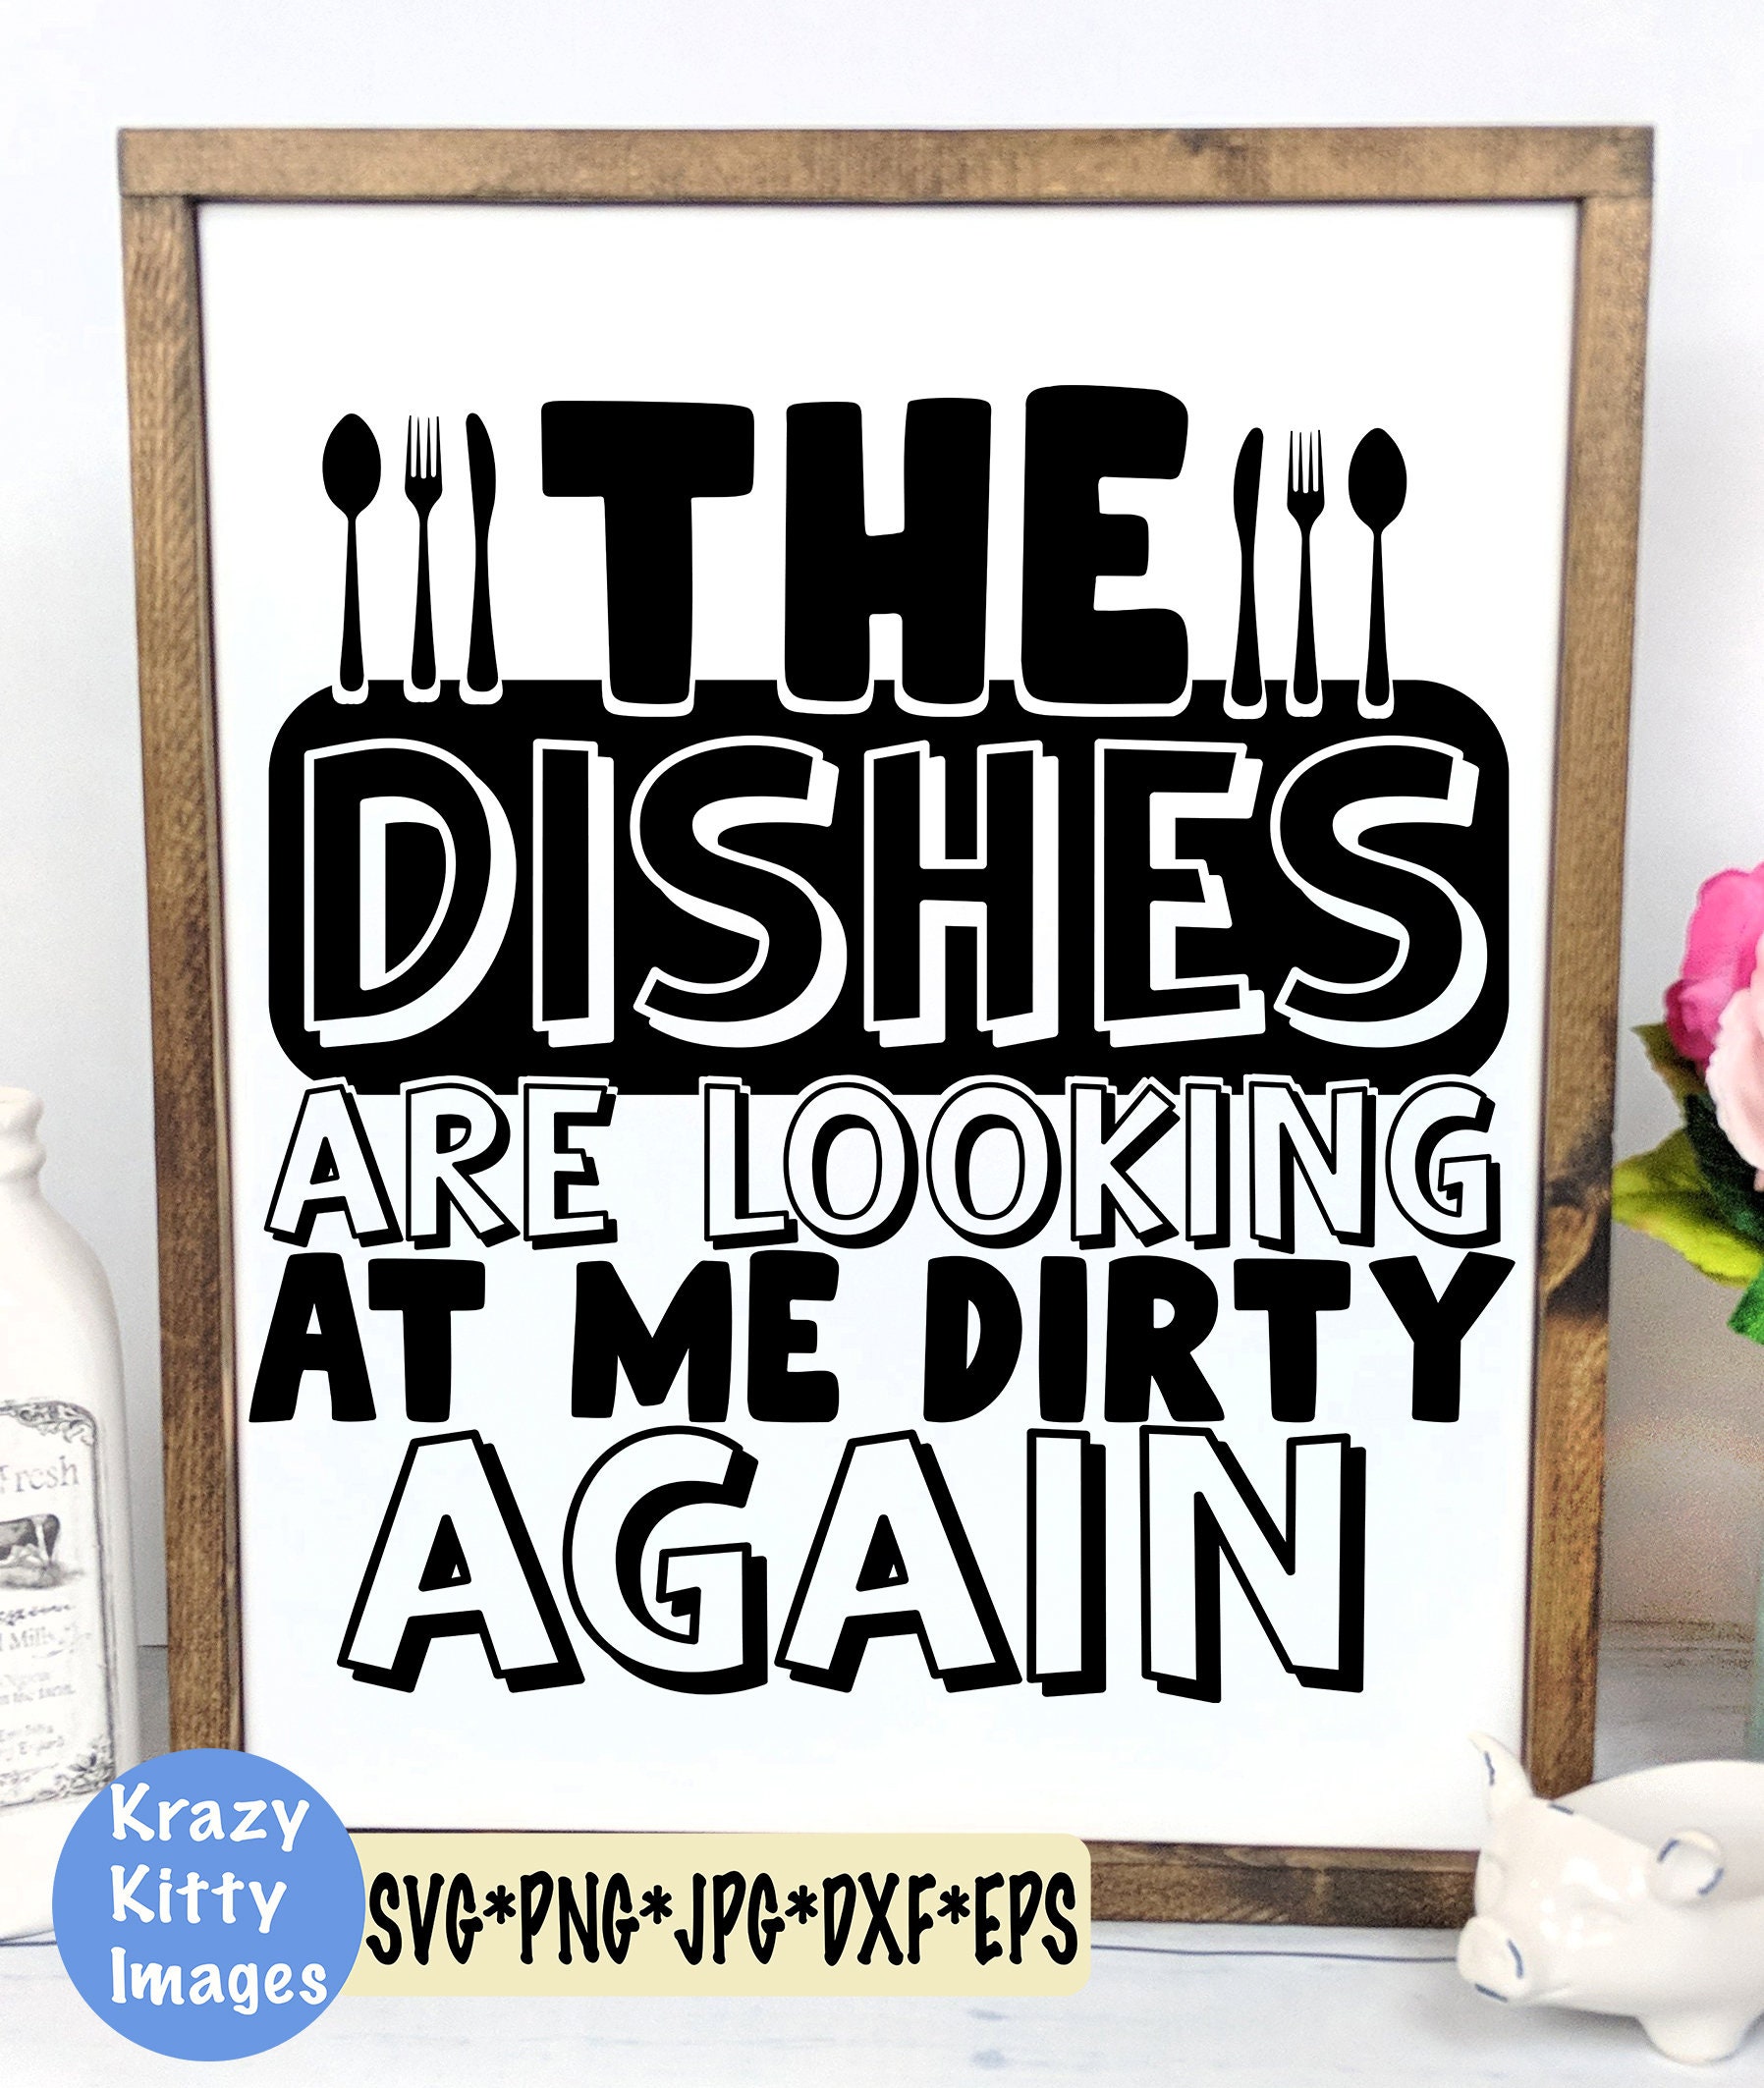 Funny Kitchen Quote The Dishes Are Looking At Me Dirty Again Metal